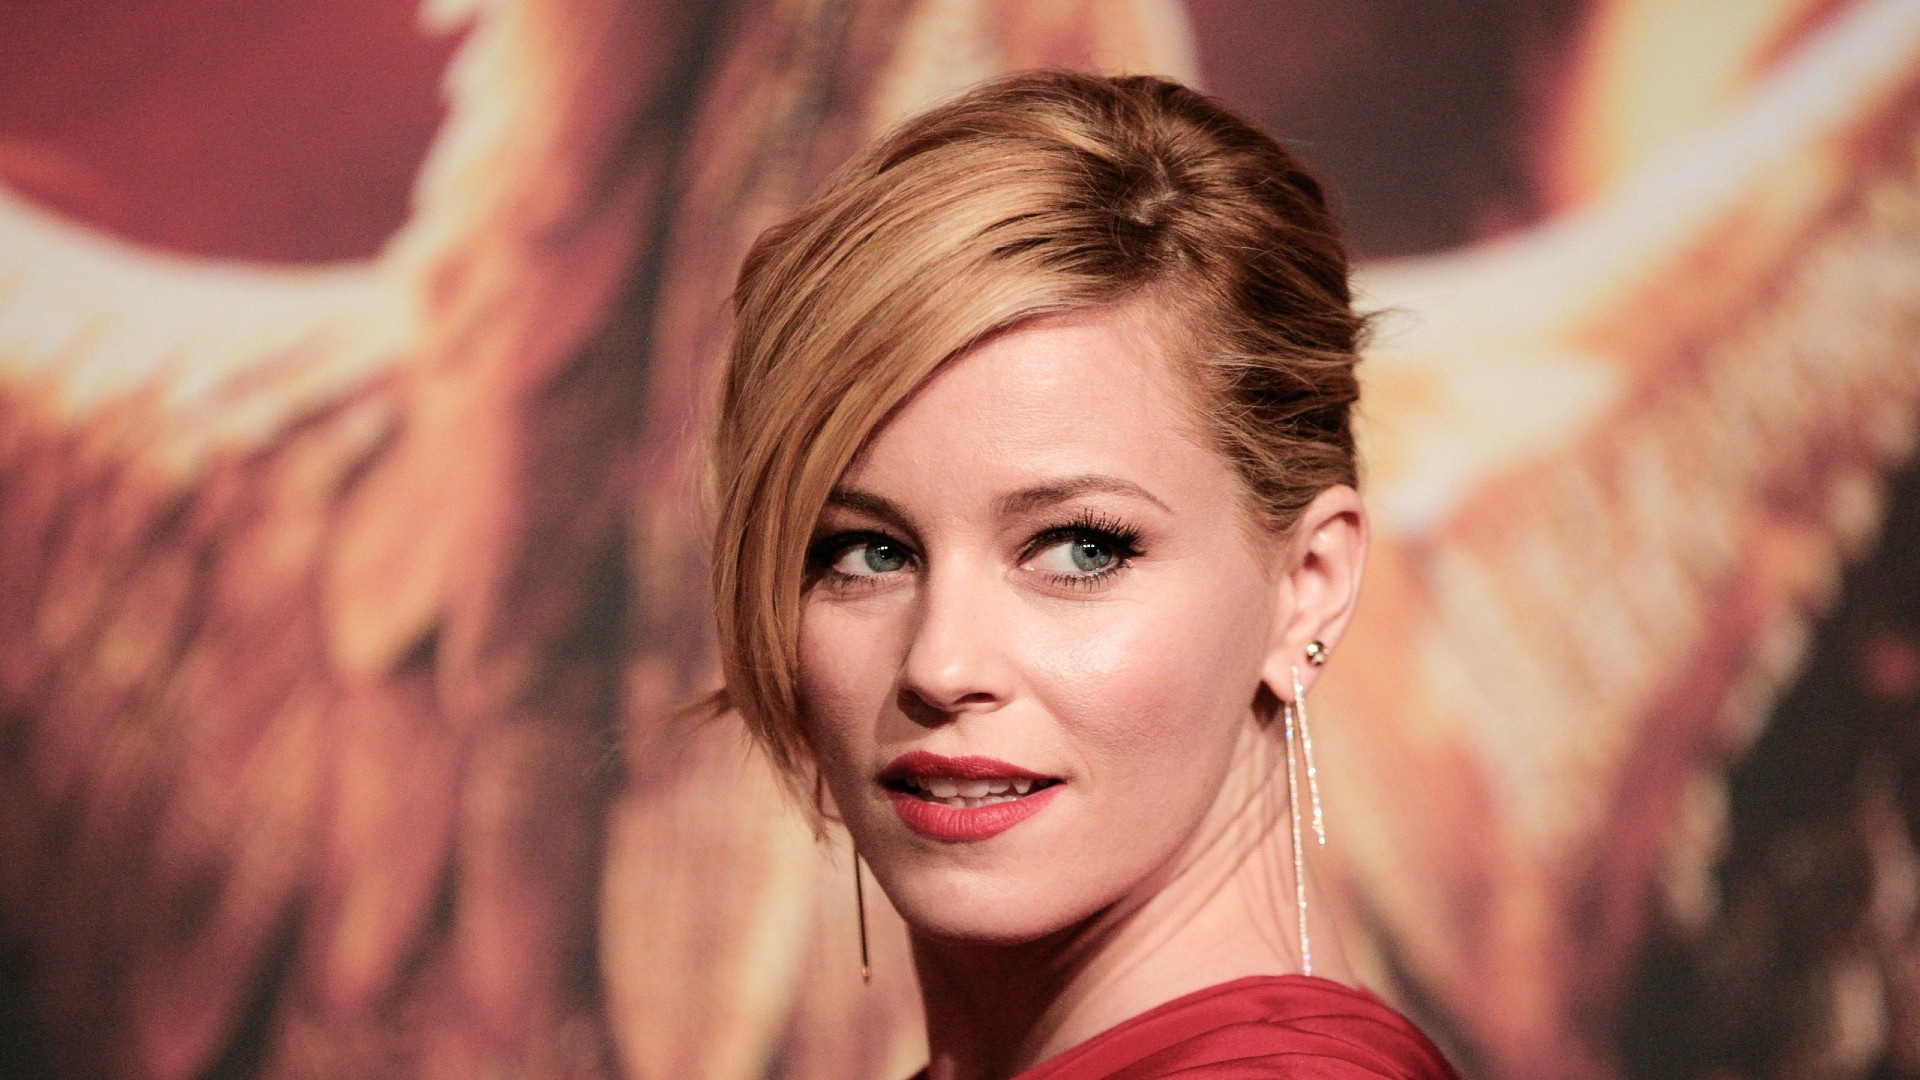 Elizabeth Banks Movies, Inspirational interview, Pitch Perfect 2, Marie Claire spread, 1920x1080 Full HD Desktop